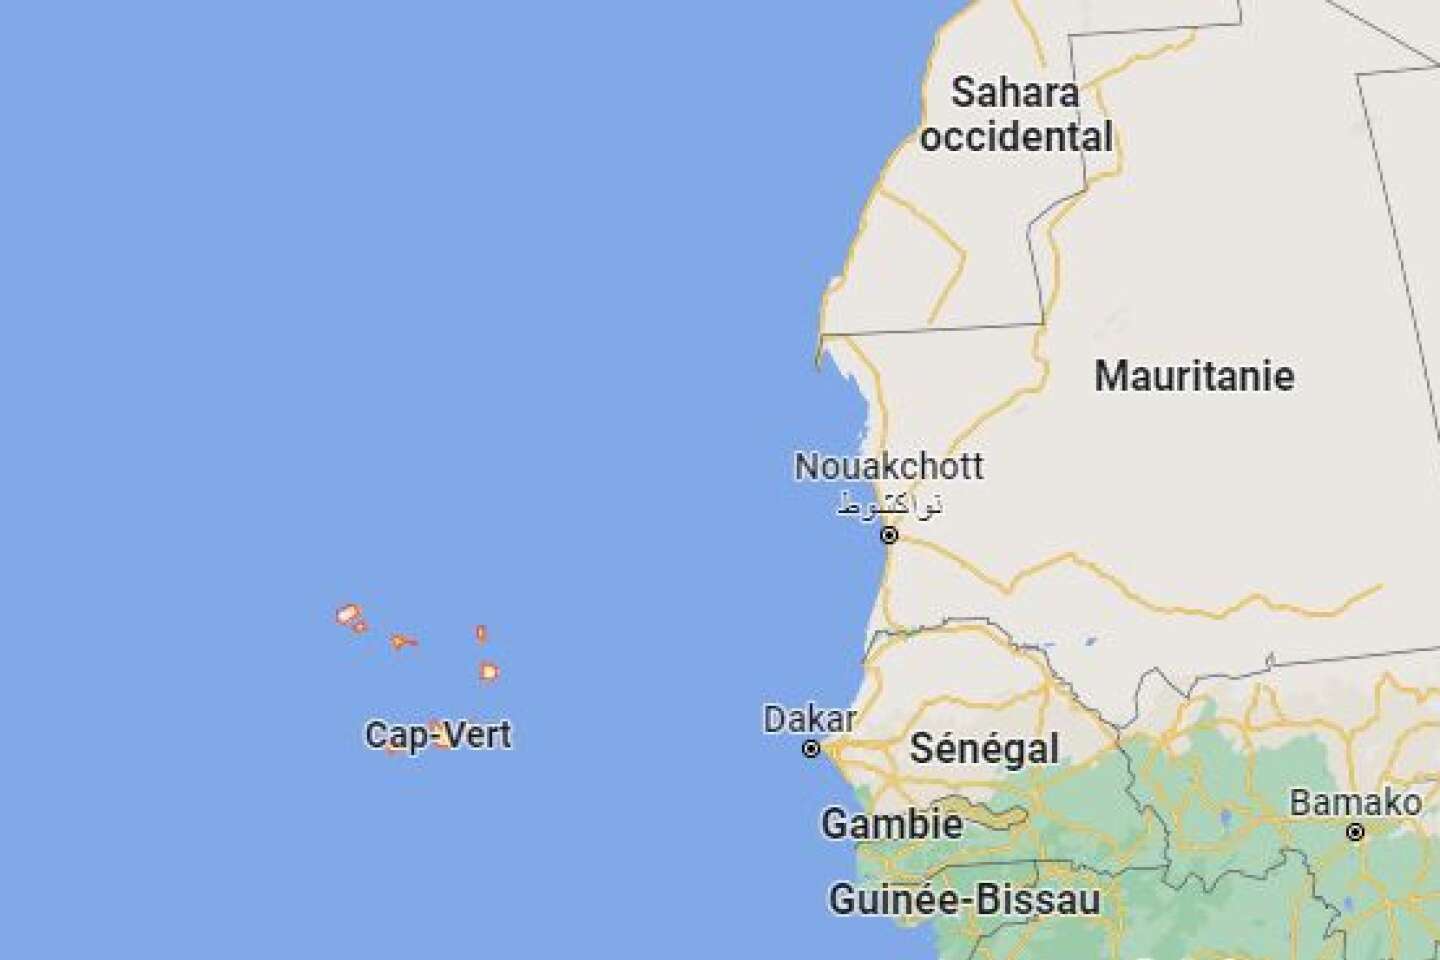 Cape Verde declares itself to be in a state of social and economic emergency